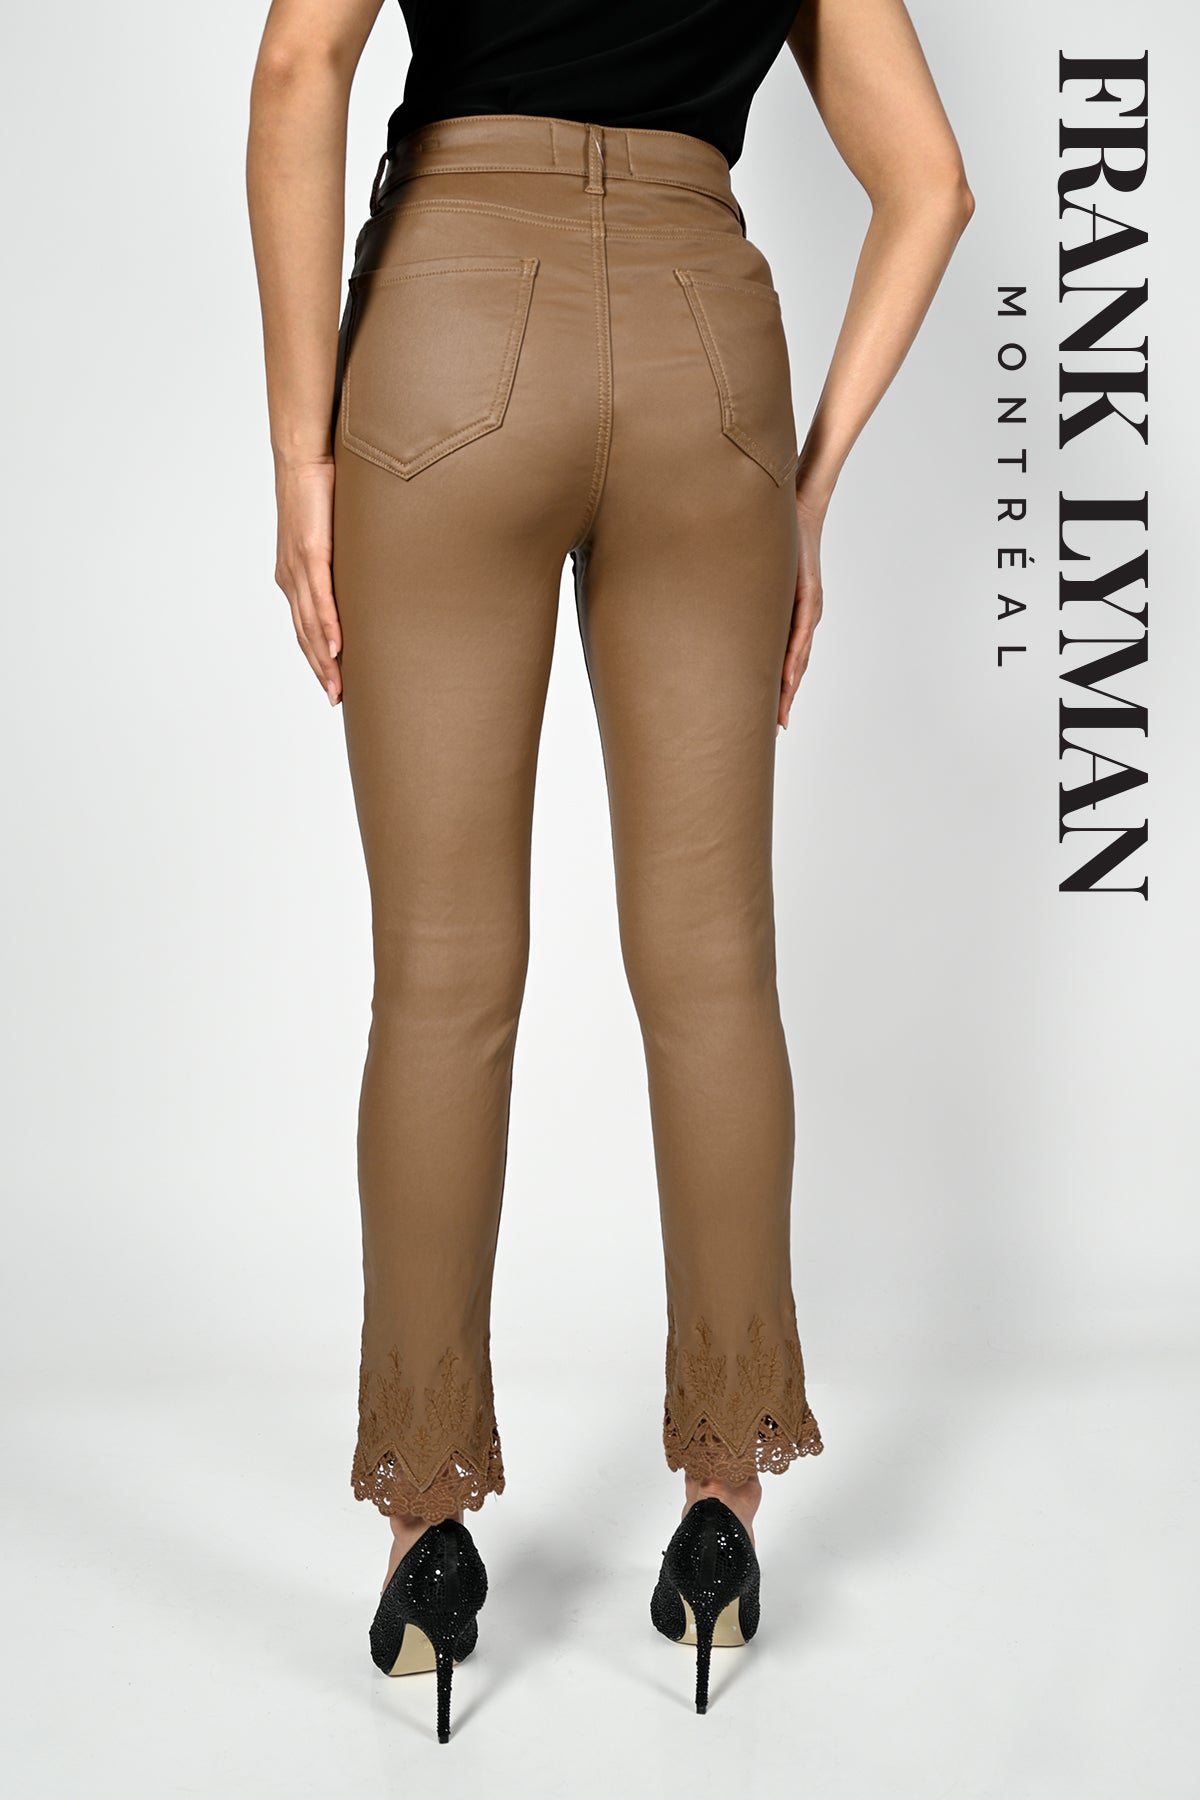 Frank Lyman Faux-Leather Jeans With Lace Style 223429 